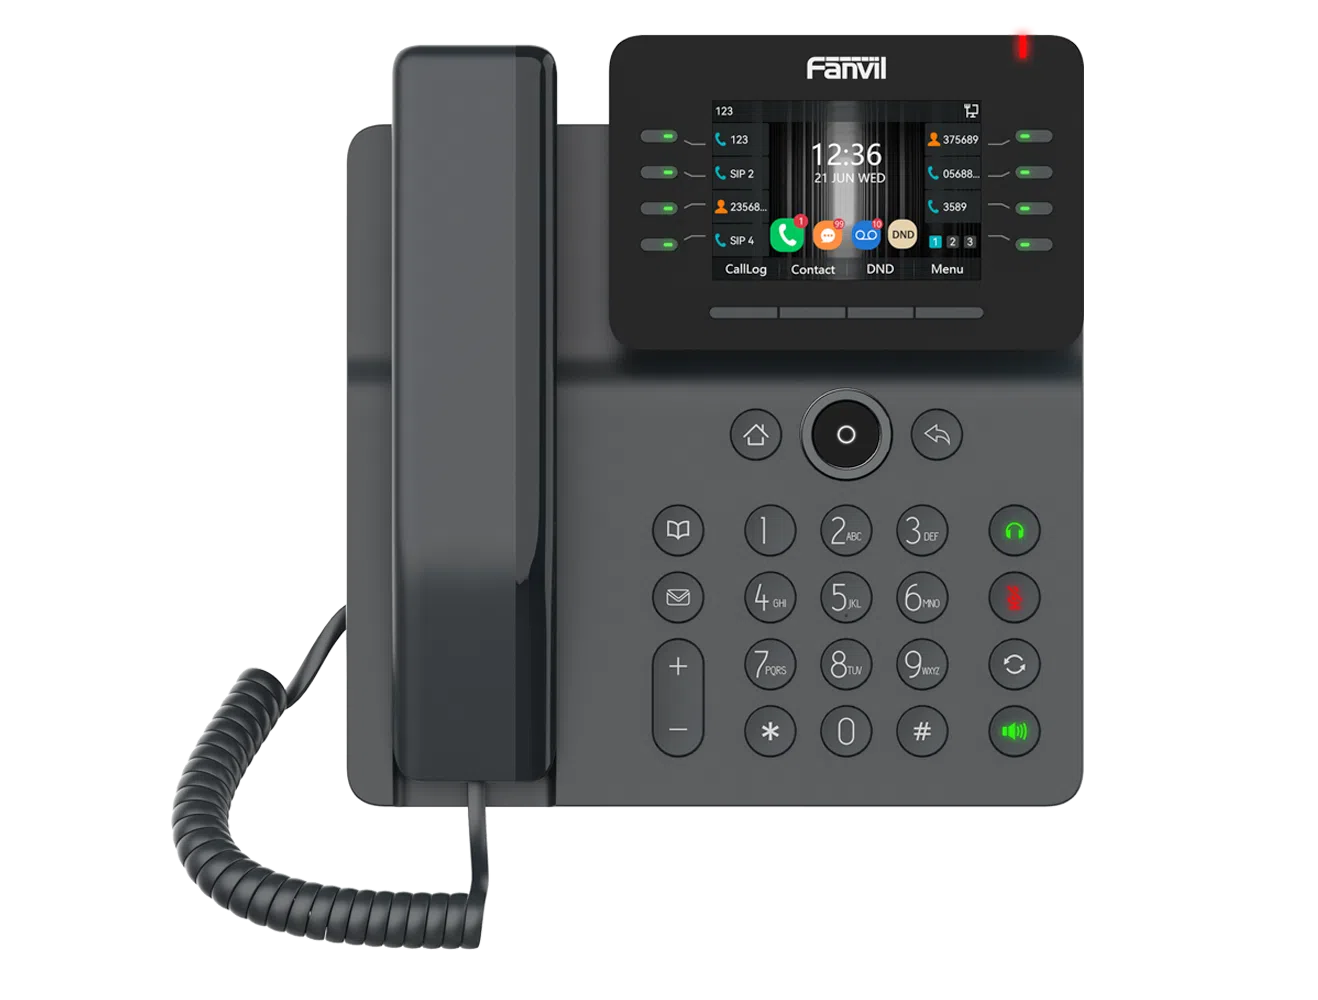 Can you provide the UPC for the product fanvil v64 Enterprise Phone?